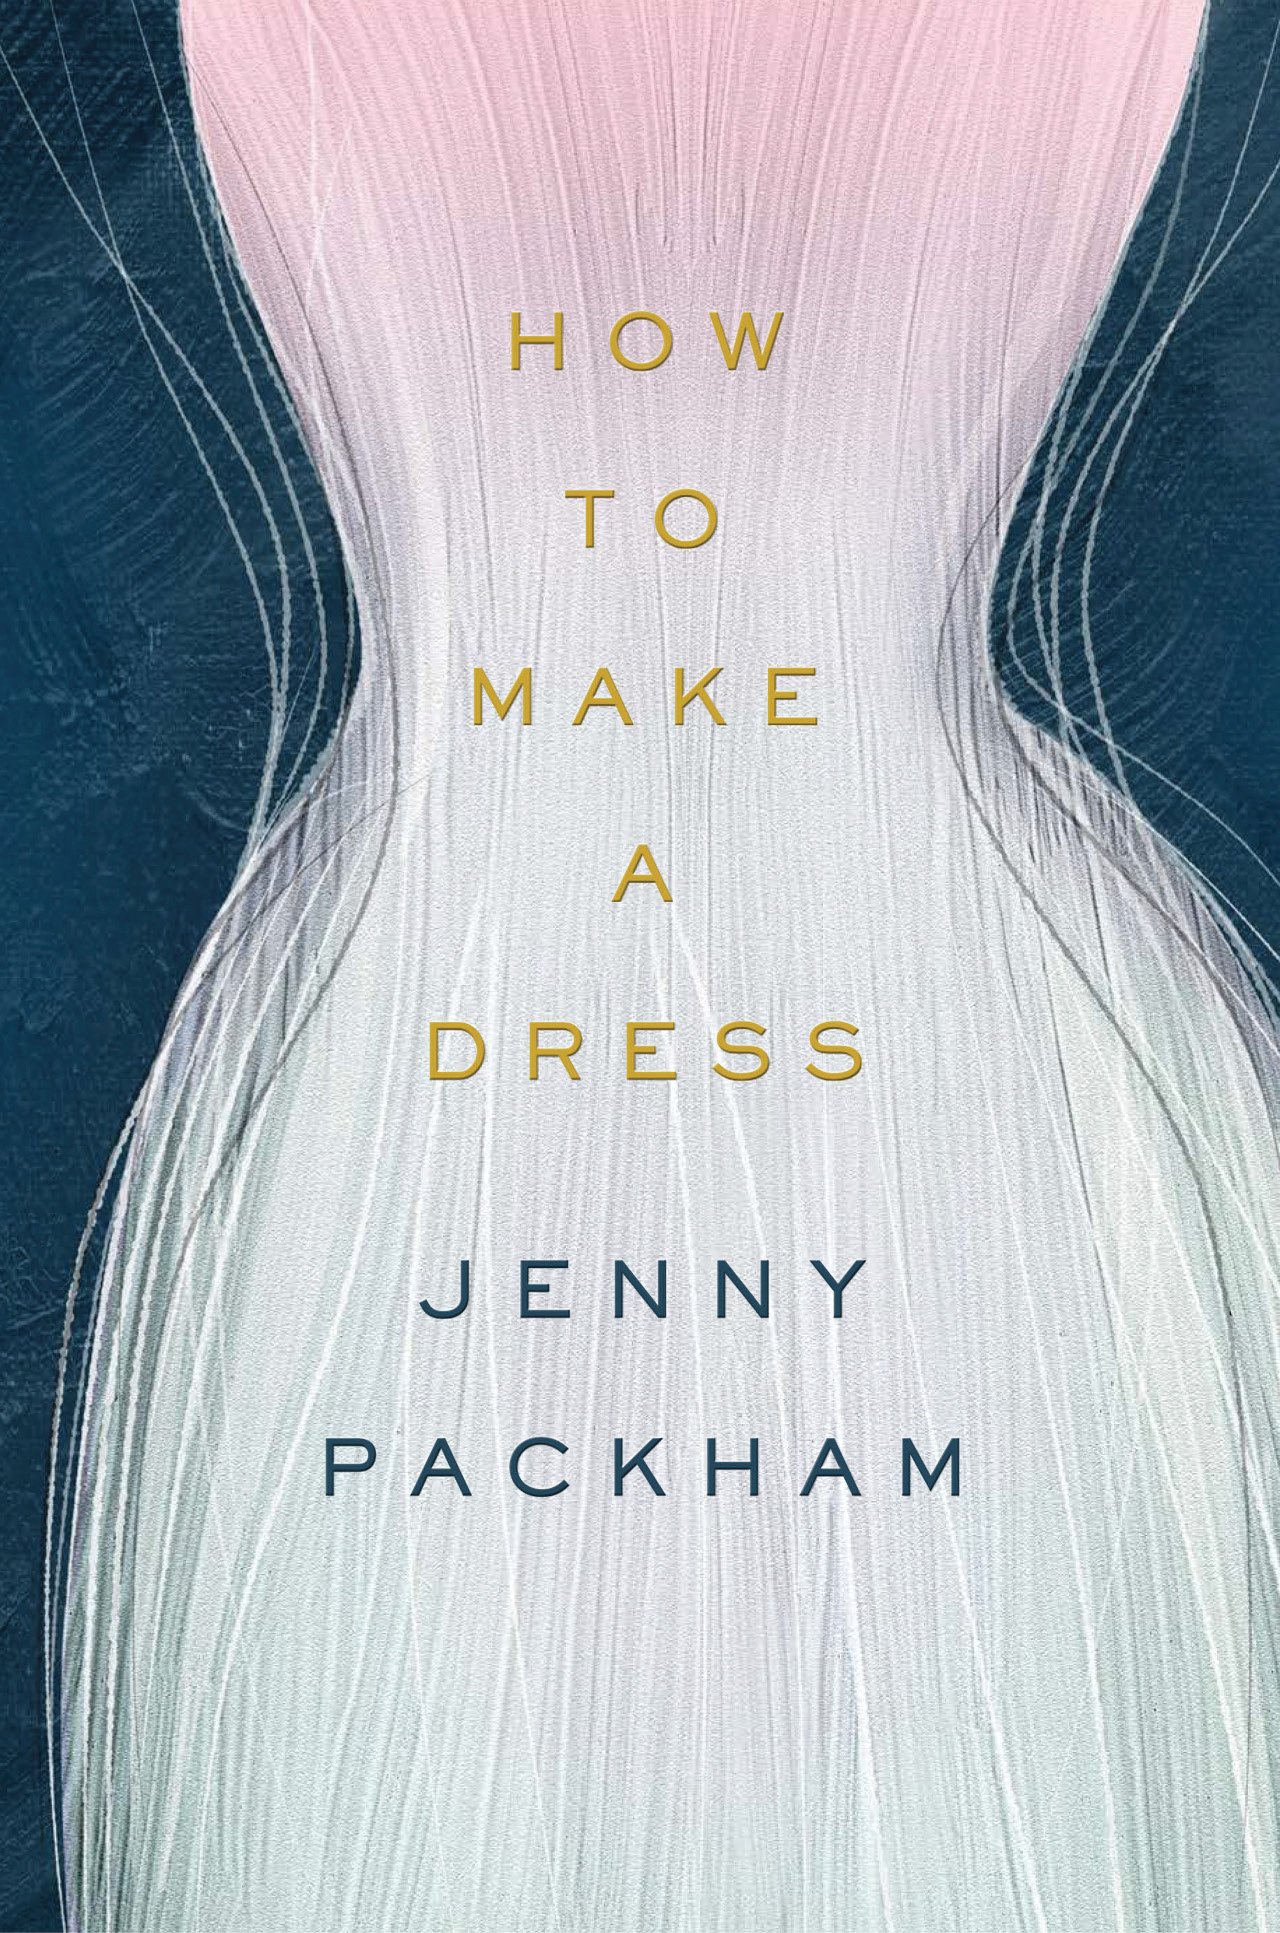 The cover of "How To Make a Dress" by Jenny Packham